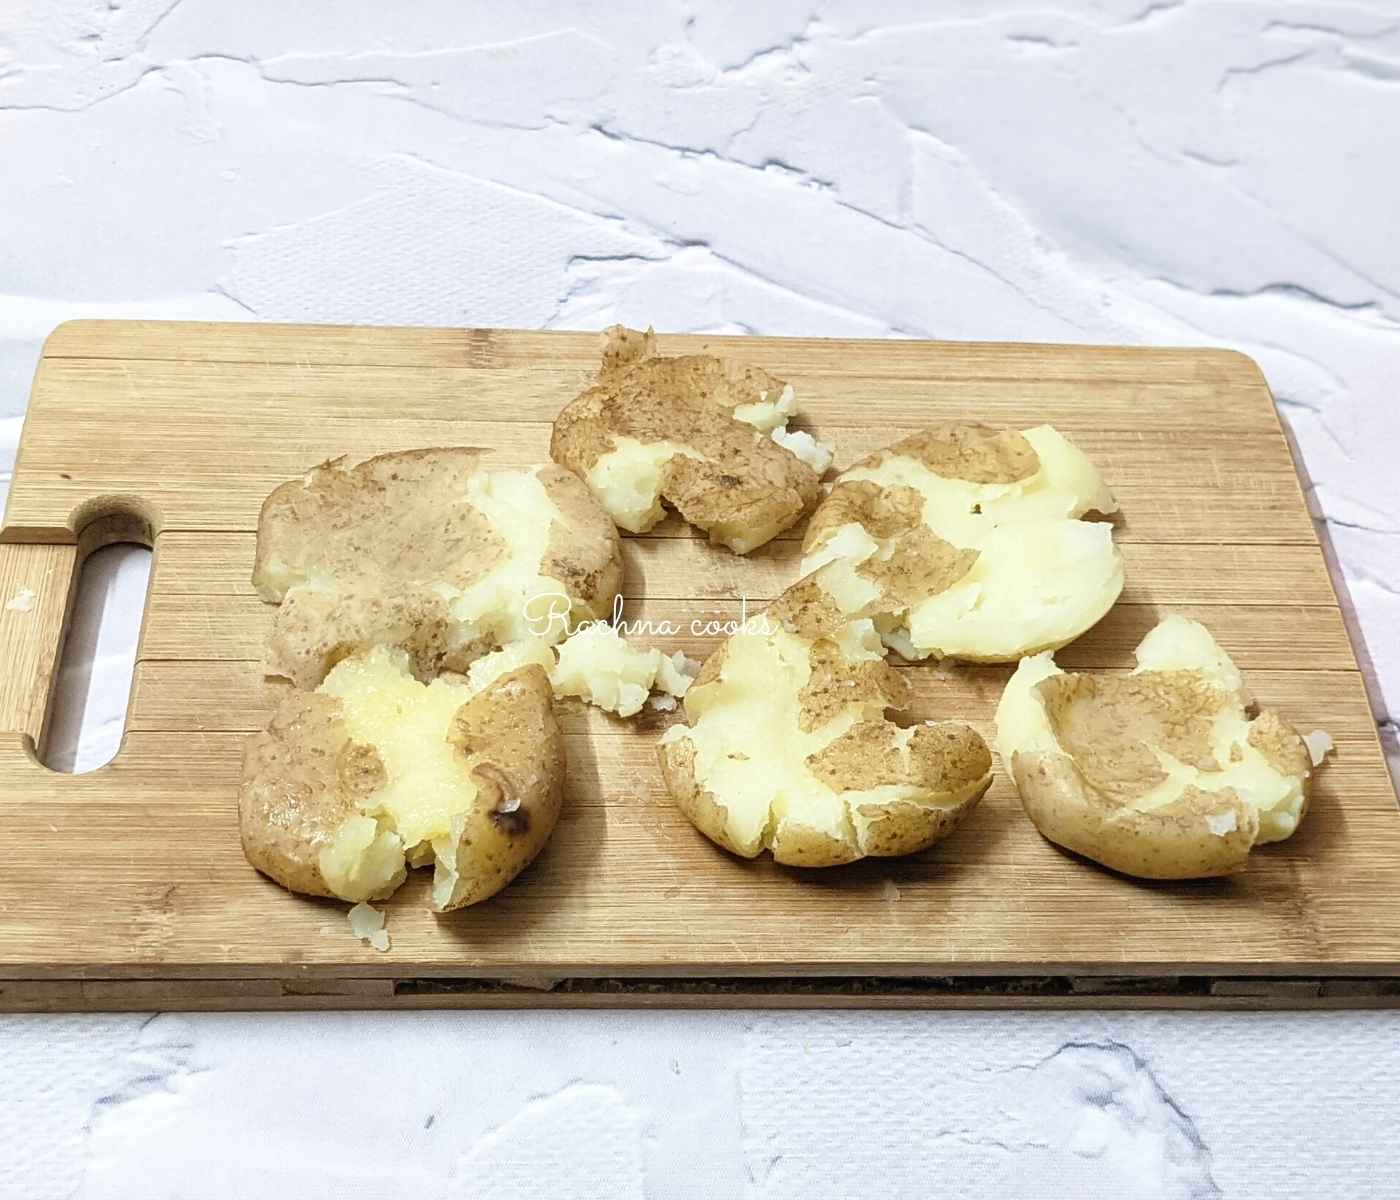 Boiled potatoes smashed with a glass on a chopping board.